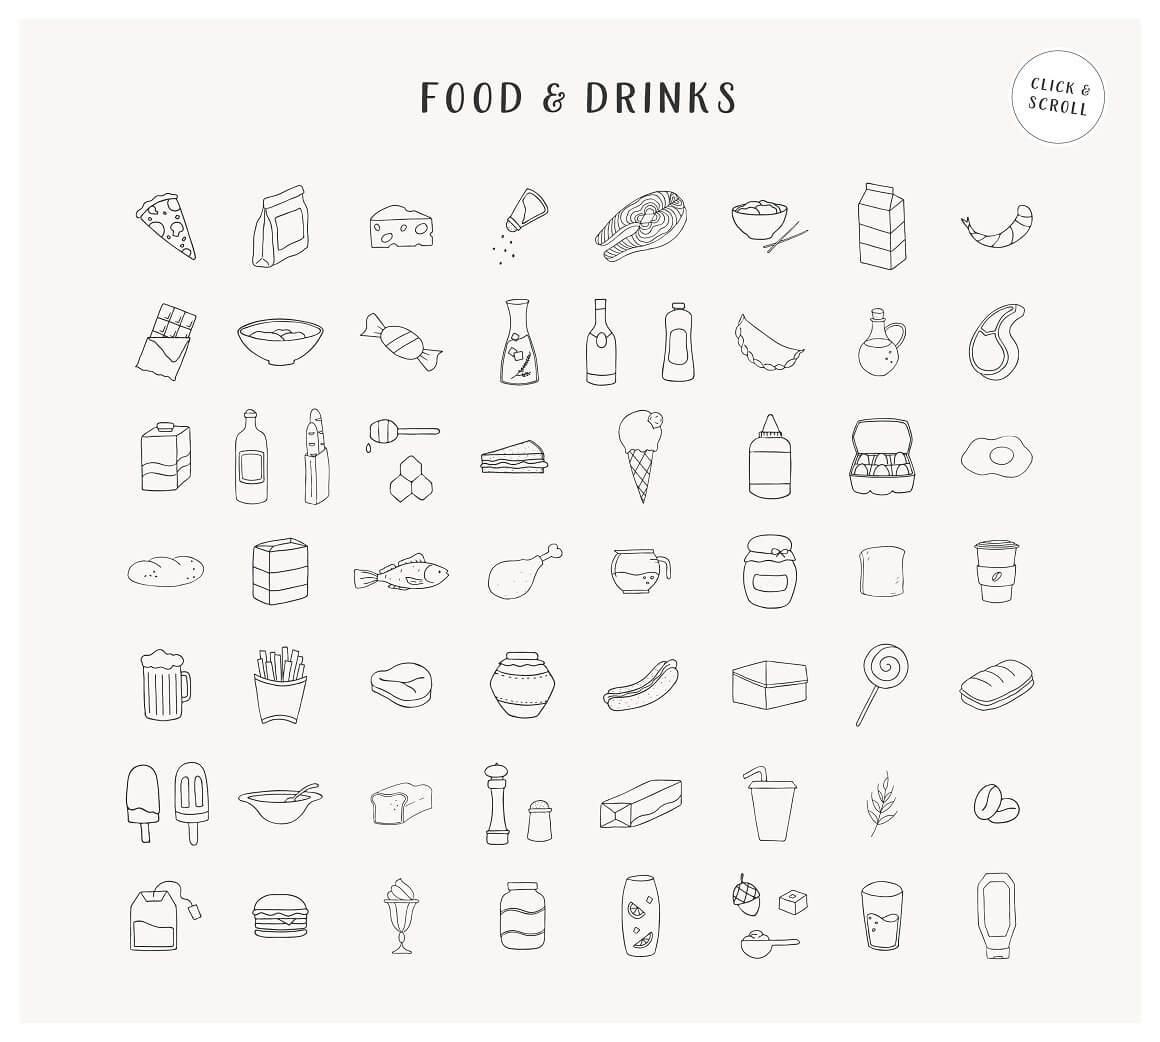 Many illustrations of food and drinks.